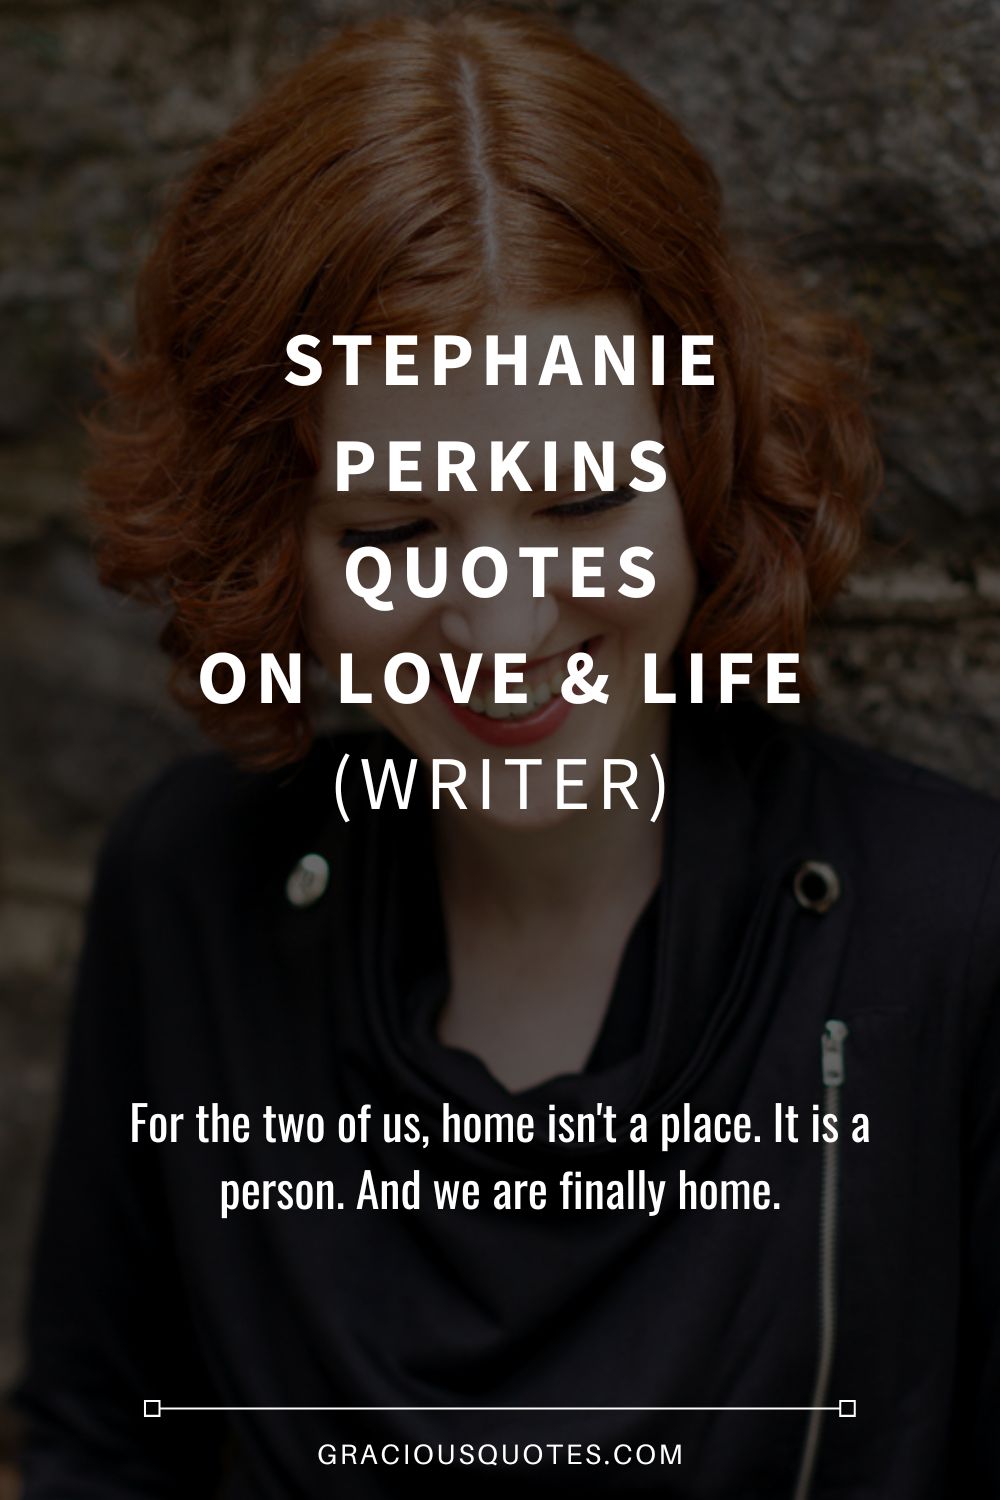 Stephanie Perkins Quotes on Love & Life (WRITER) - Gracious Quotes